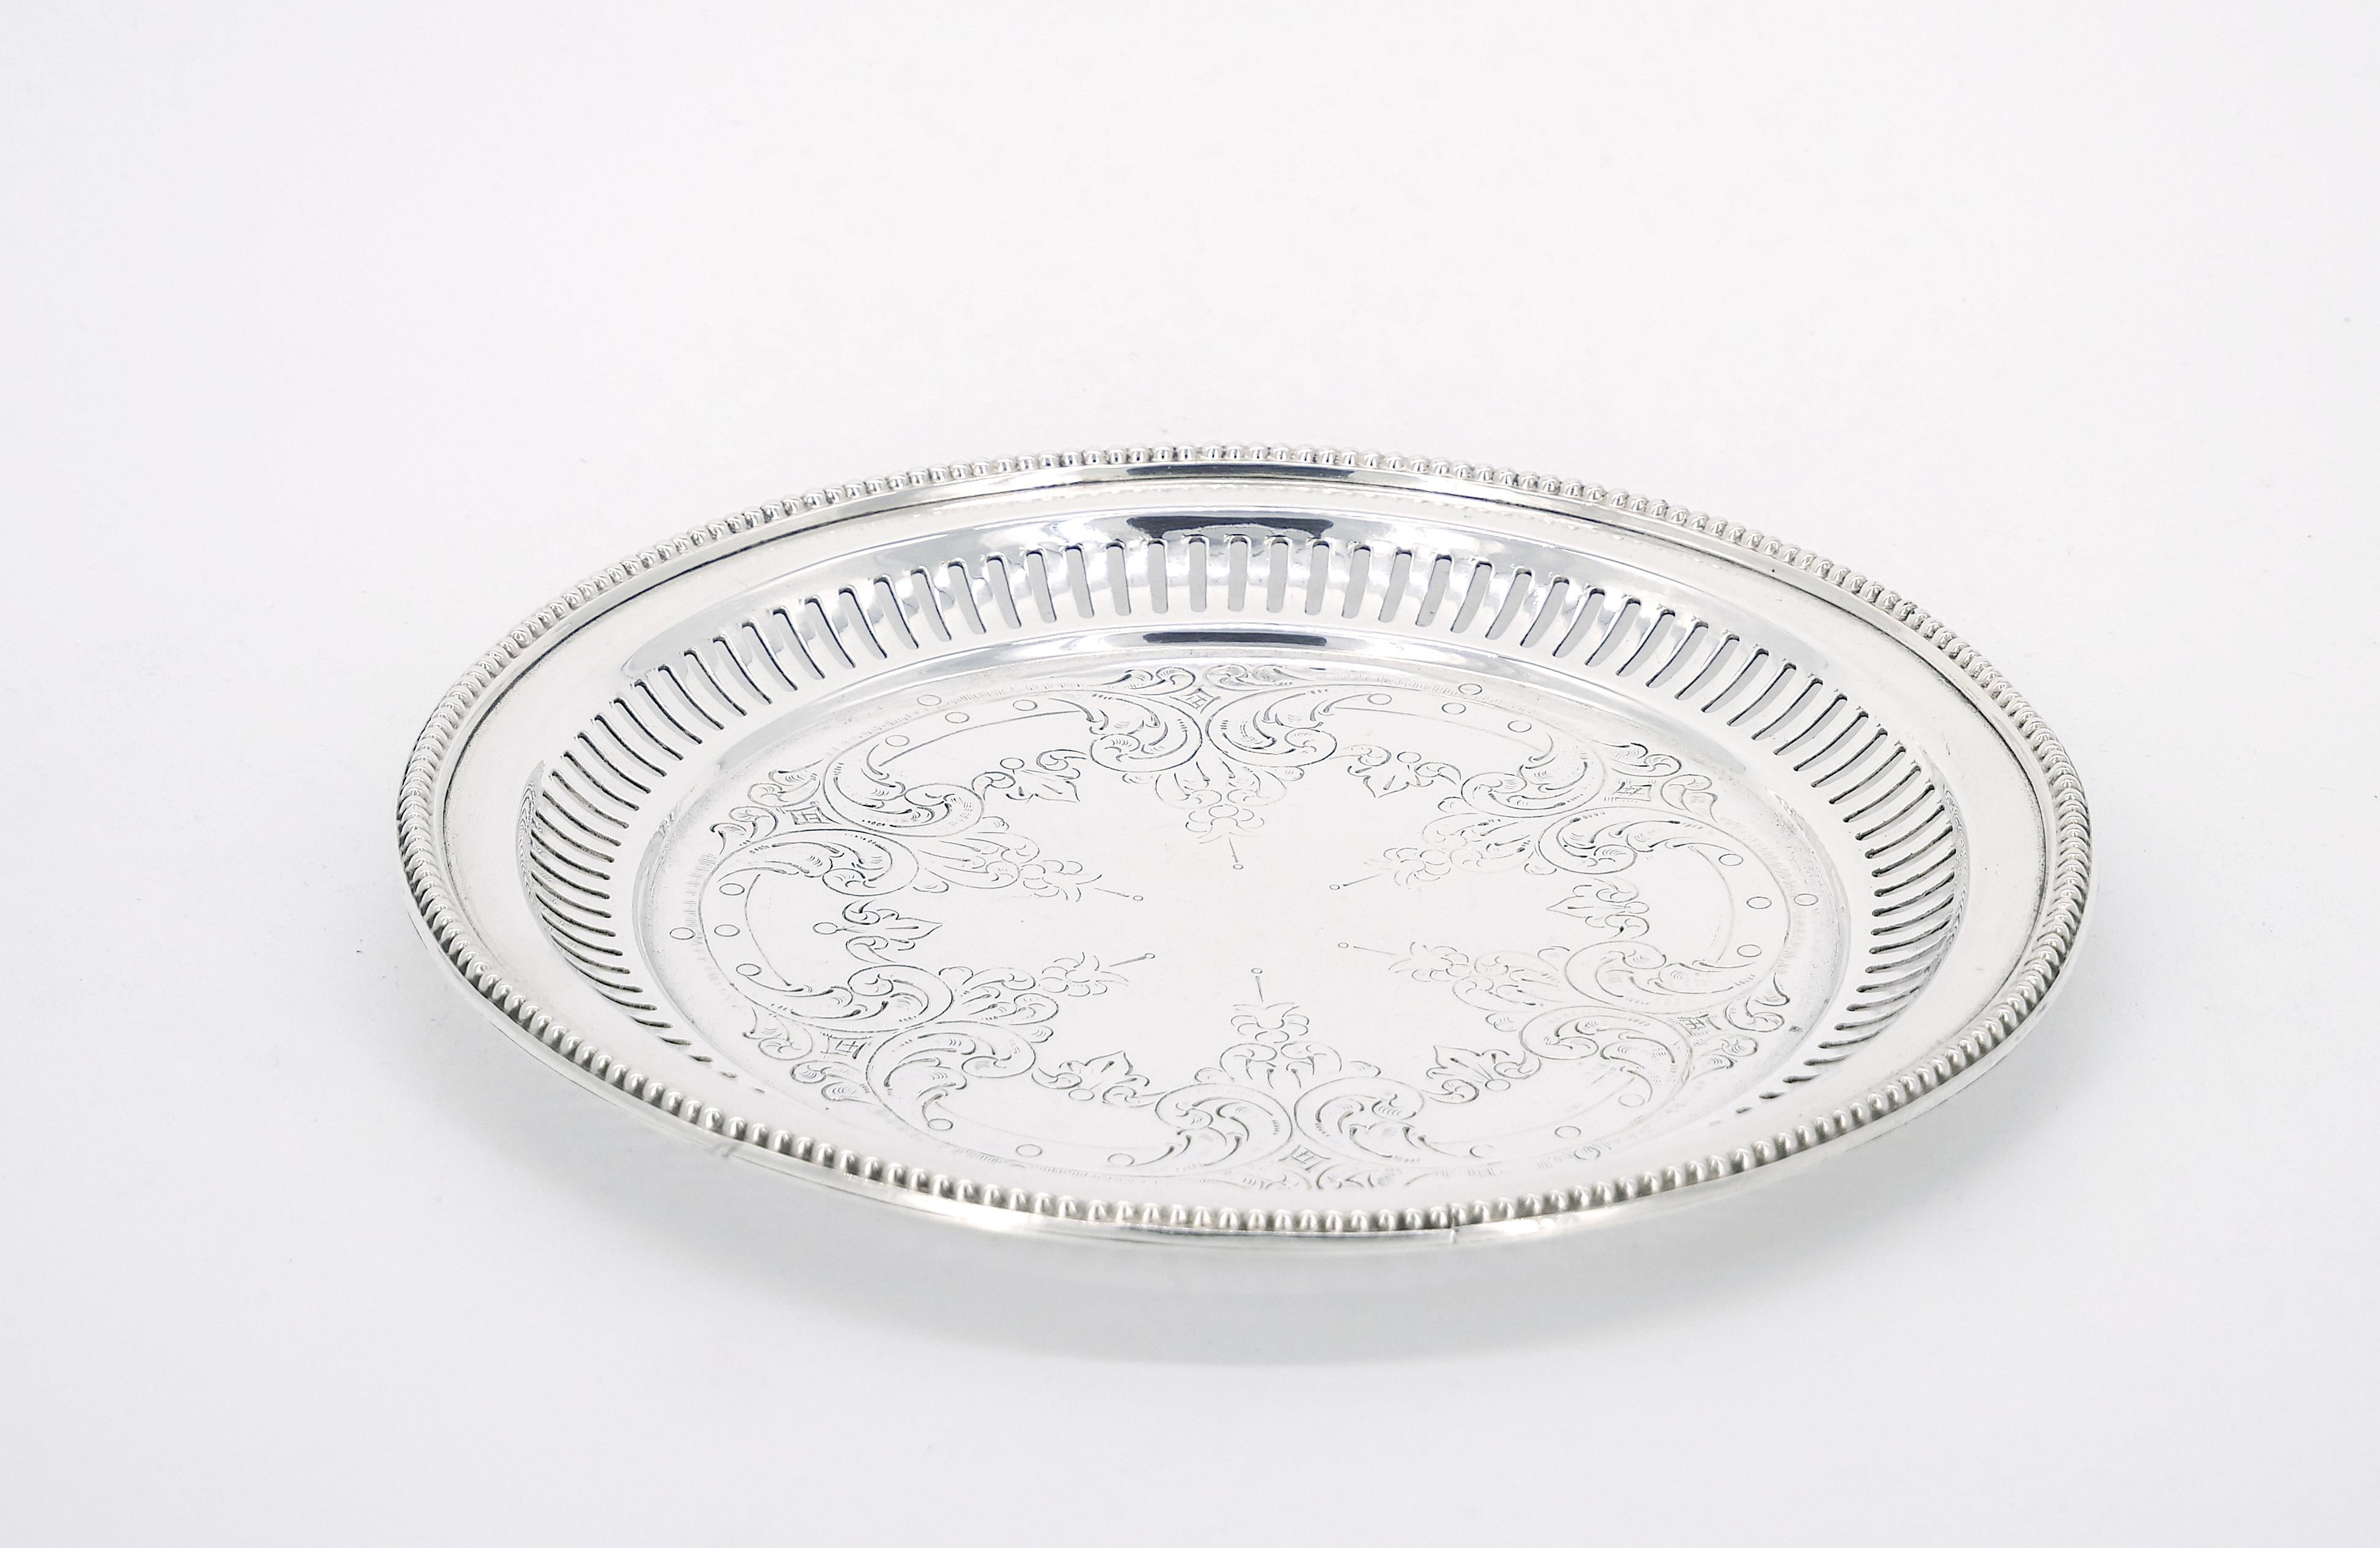 
Enhance your dining or bar experience with our exquisite Sheffield silver plate round shape footed serving tray. This  elegant piece combines timeless craftsmanship with intricate interior hand engraved design details, Creating a stunning focal